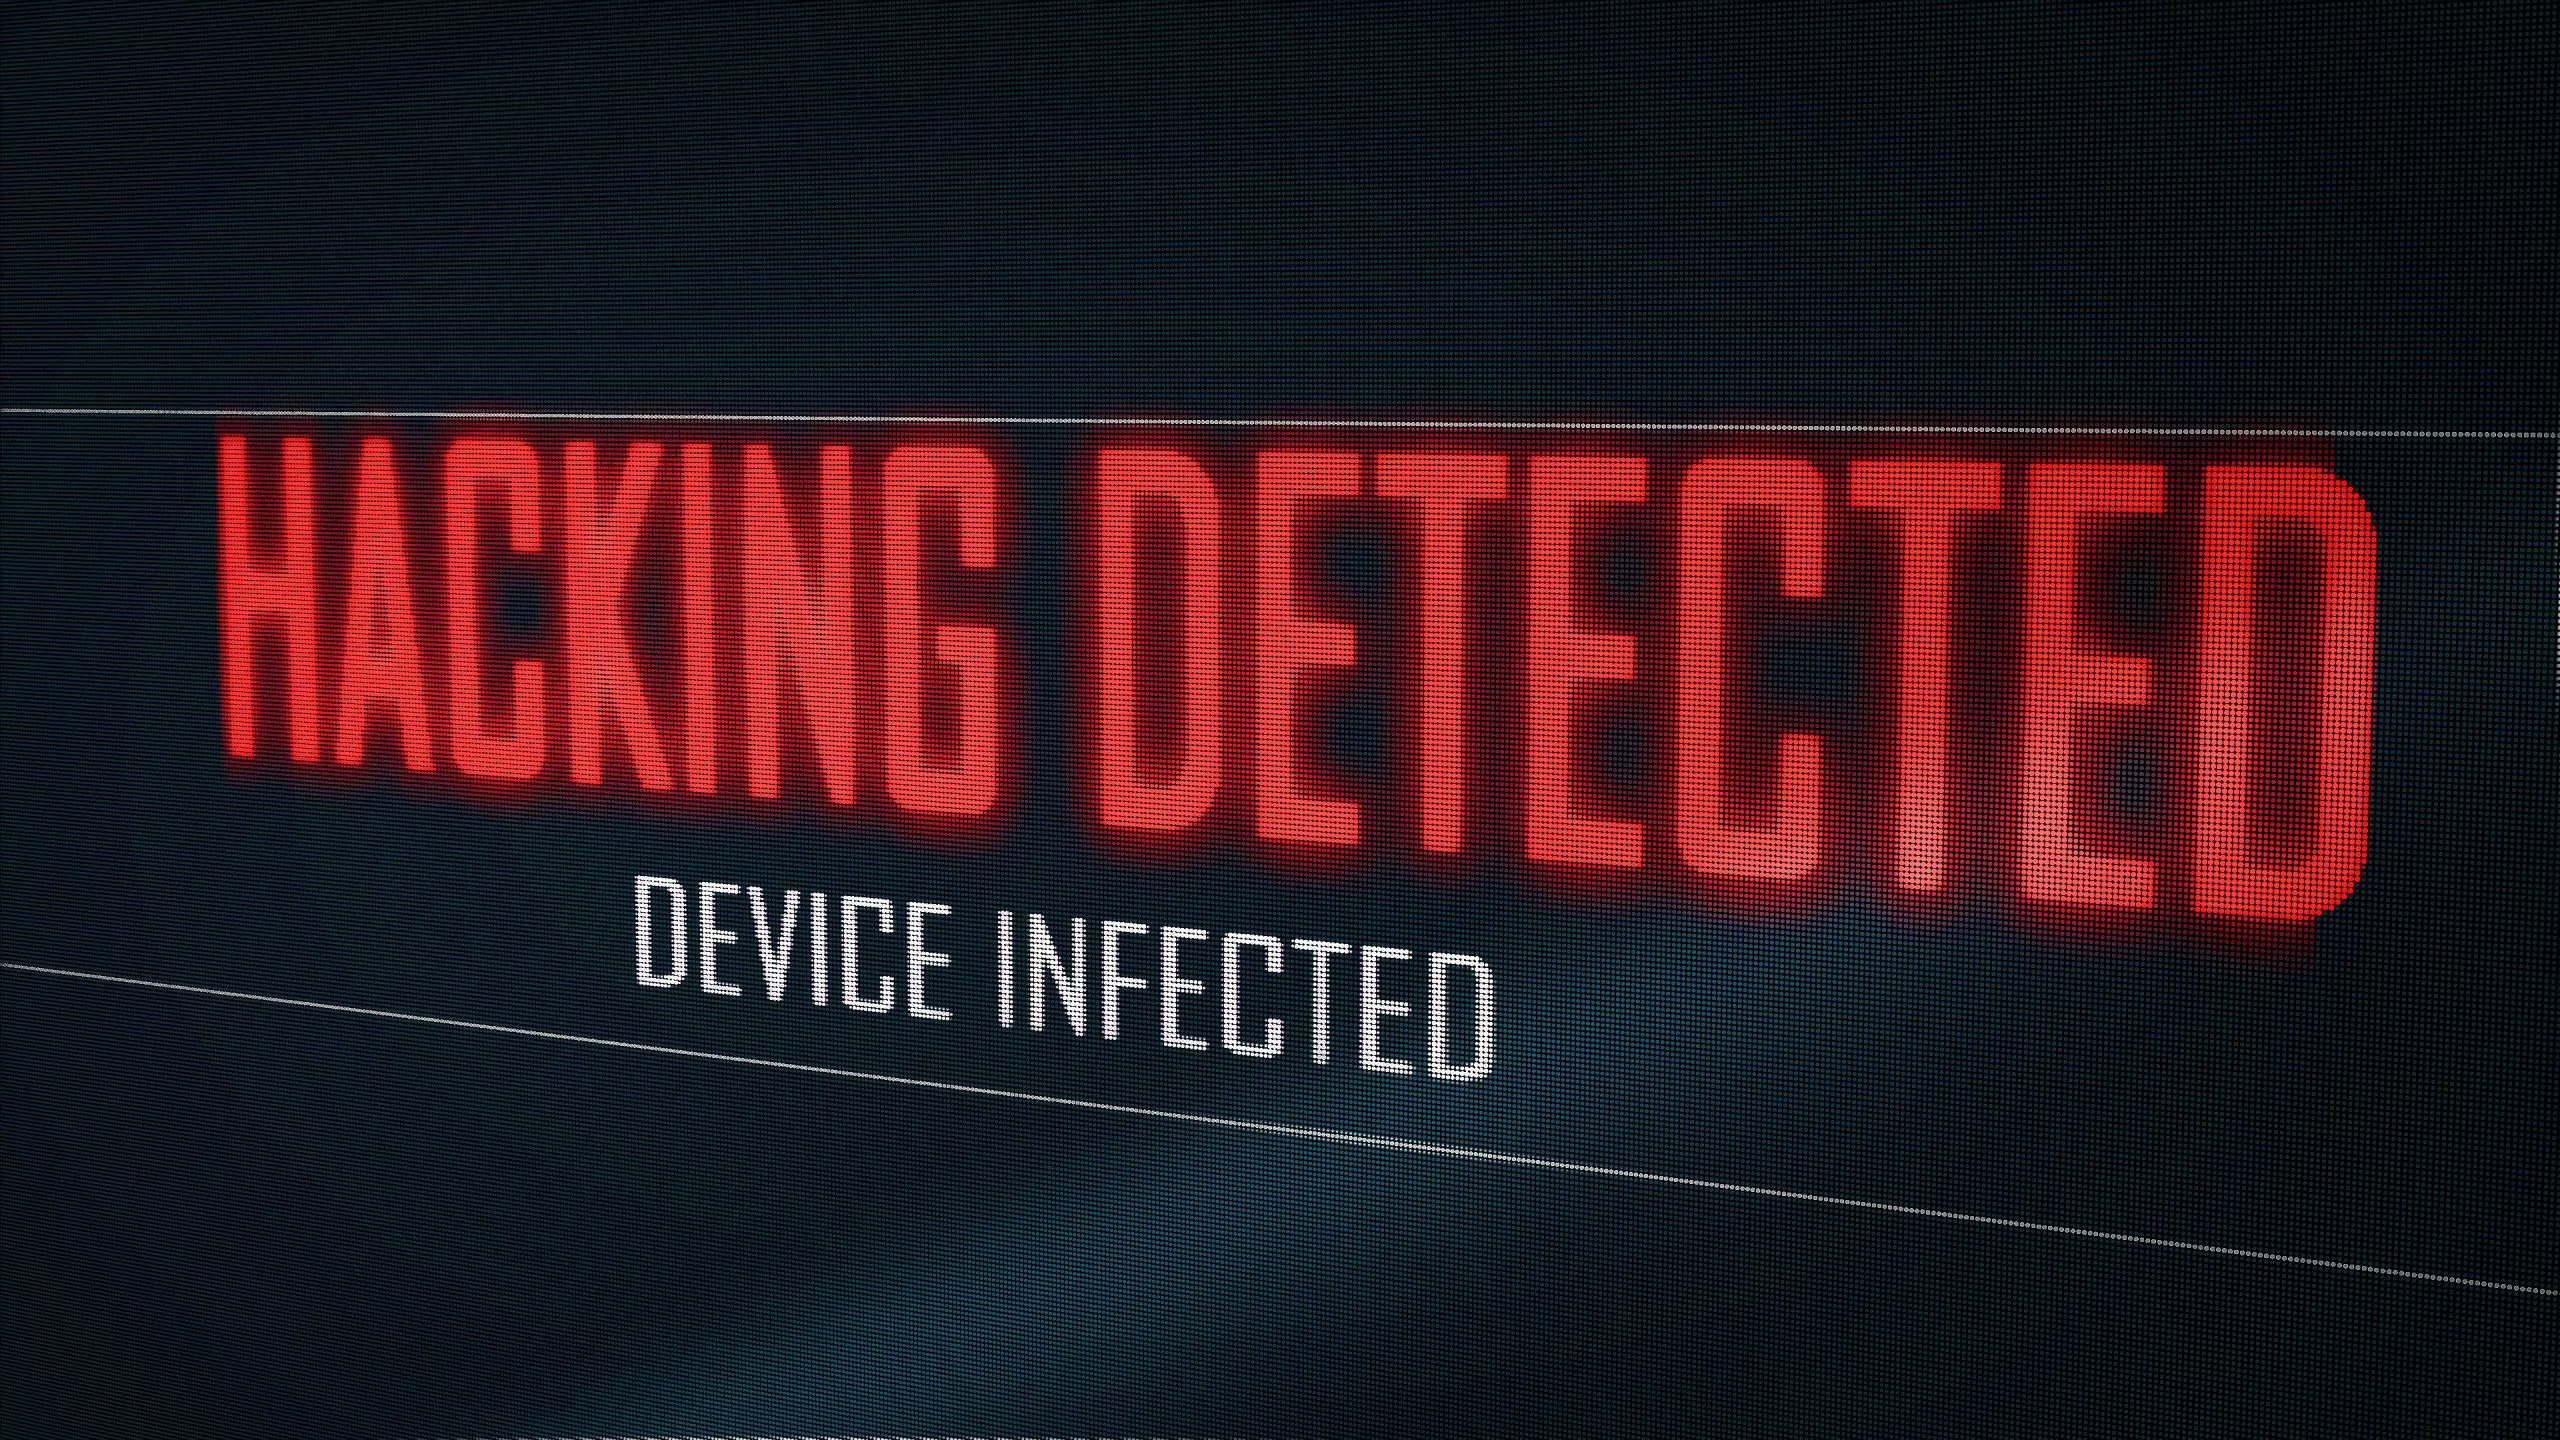 Hacking detected device infected from virus on computer screen pixel